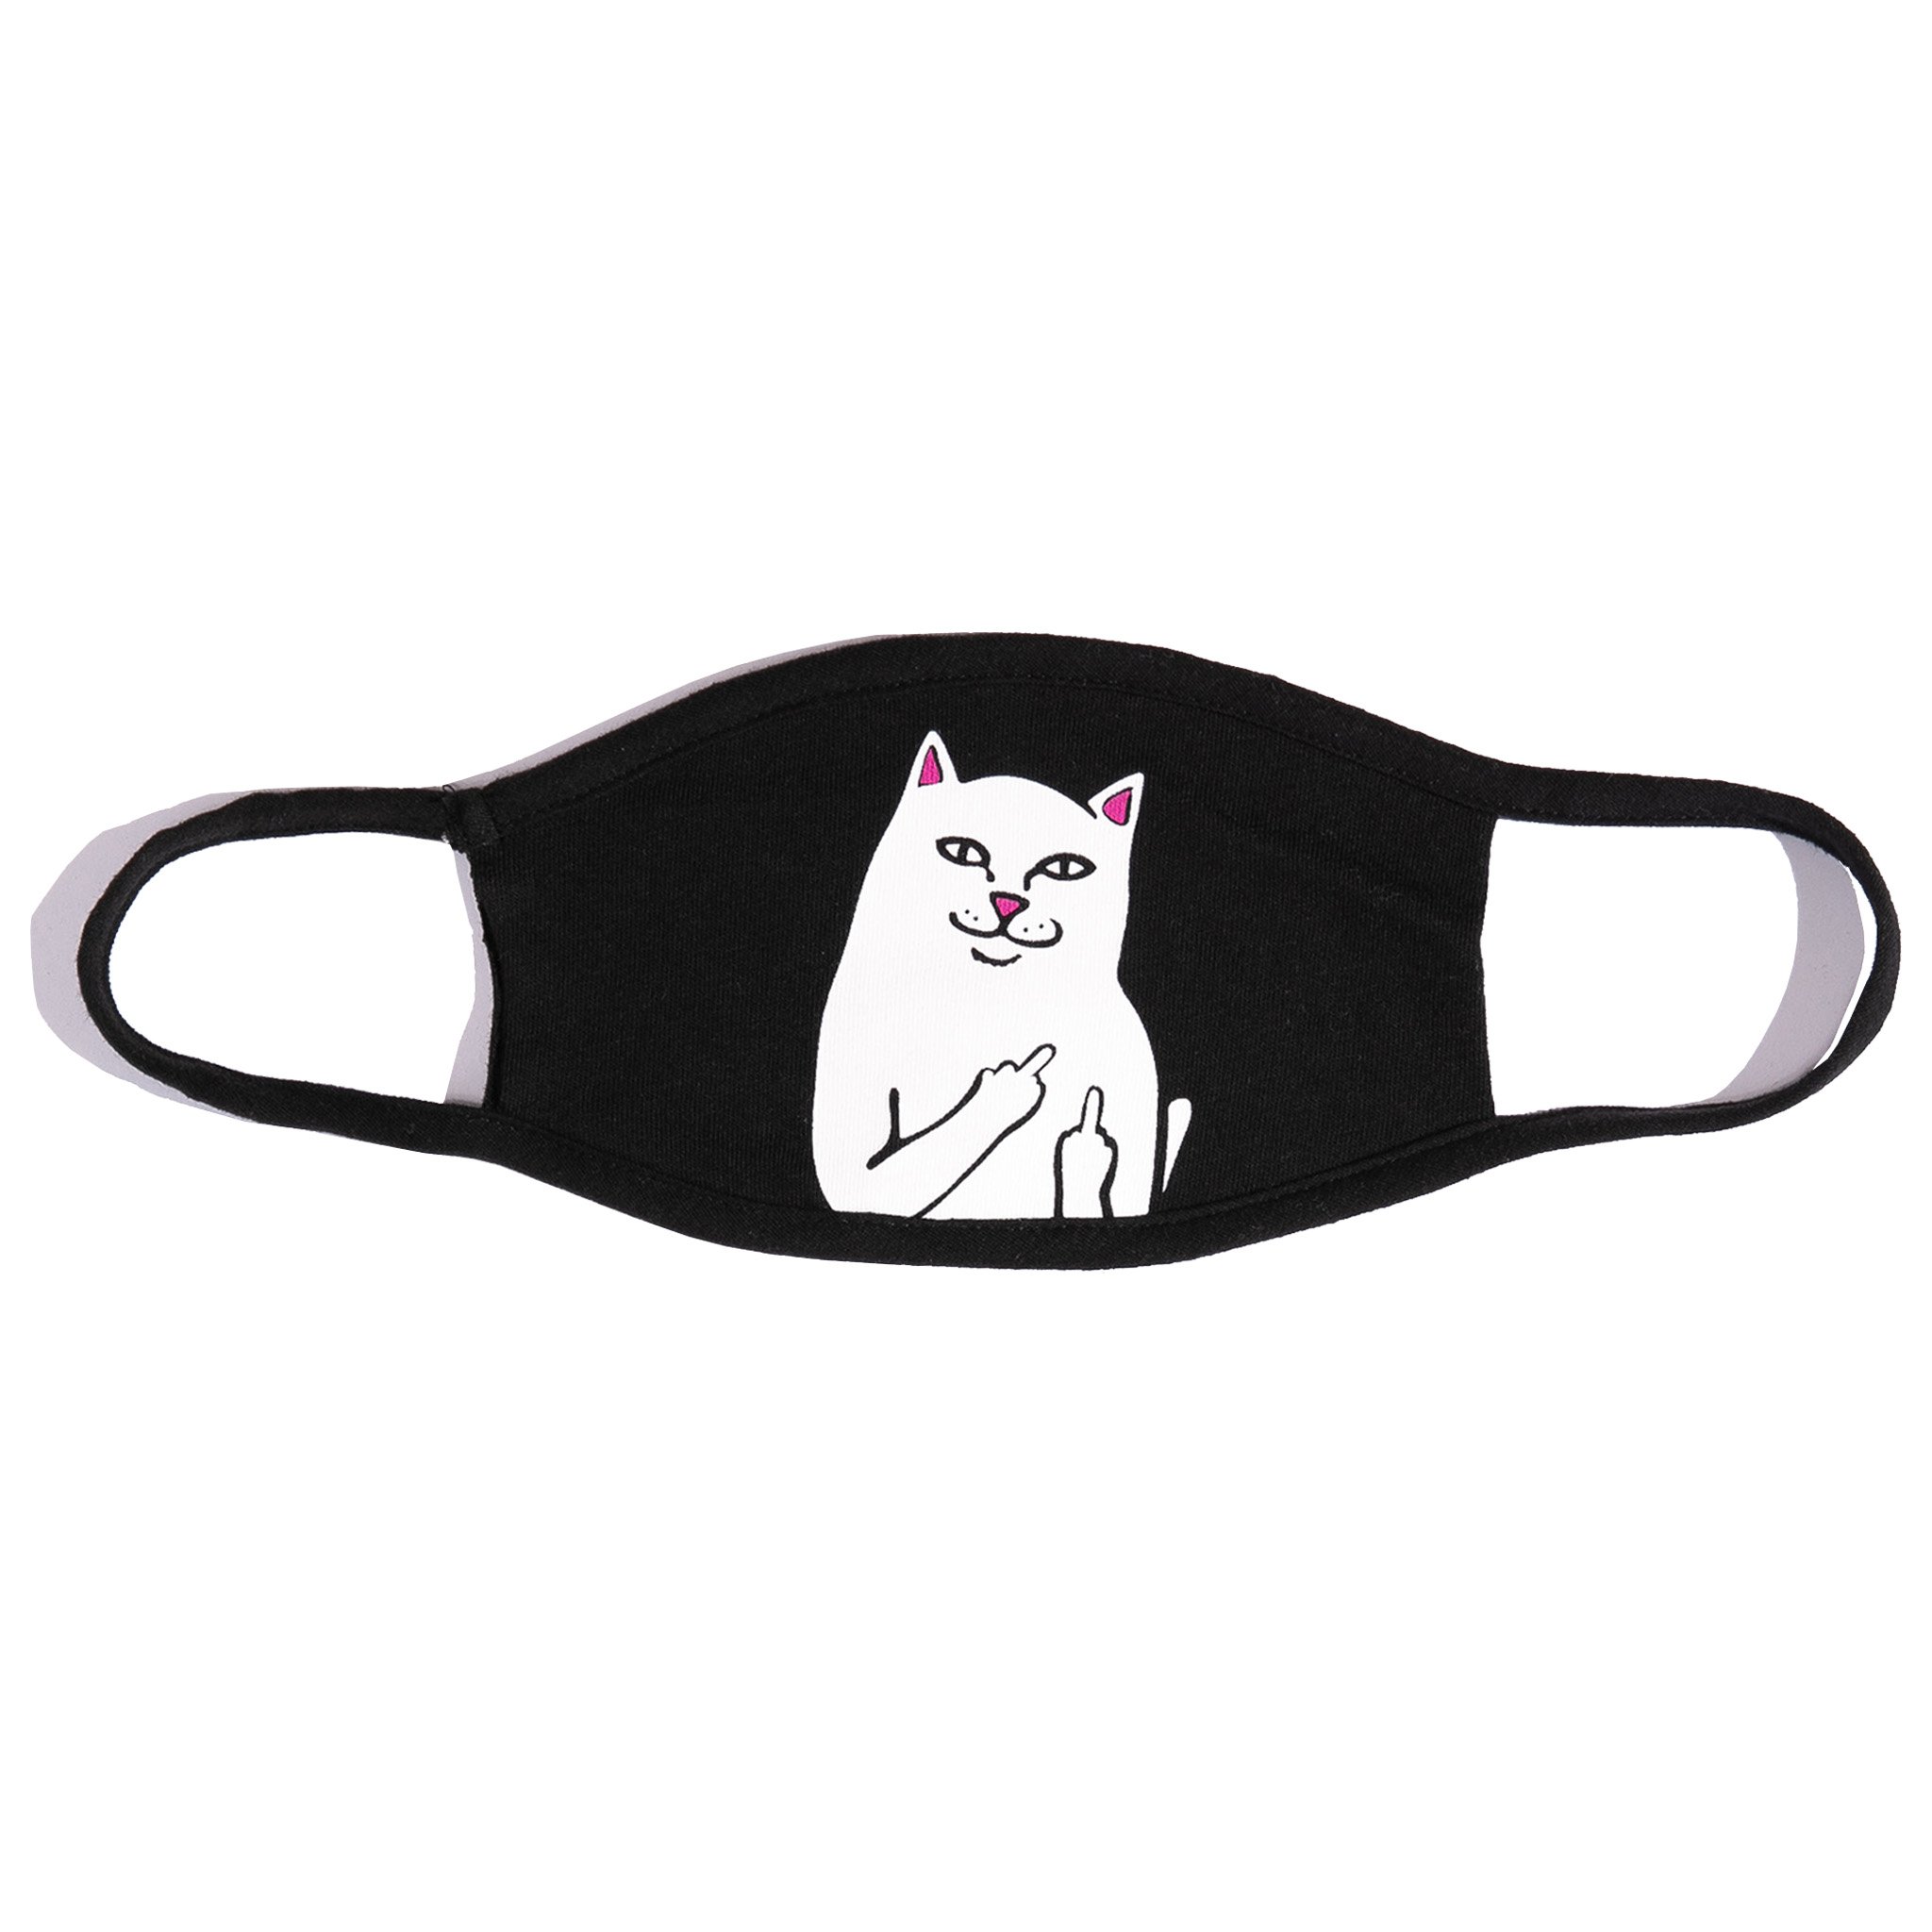 Image of Lord Nermal Face Mask (Black)